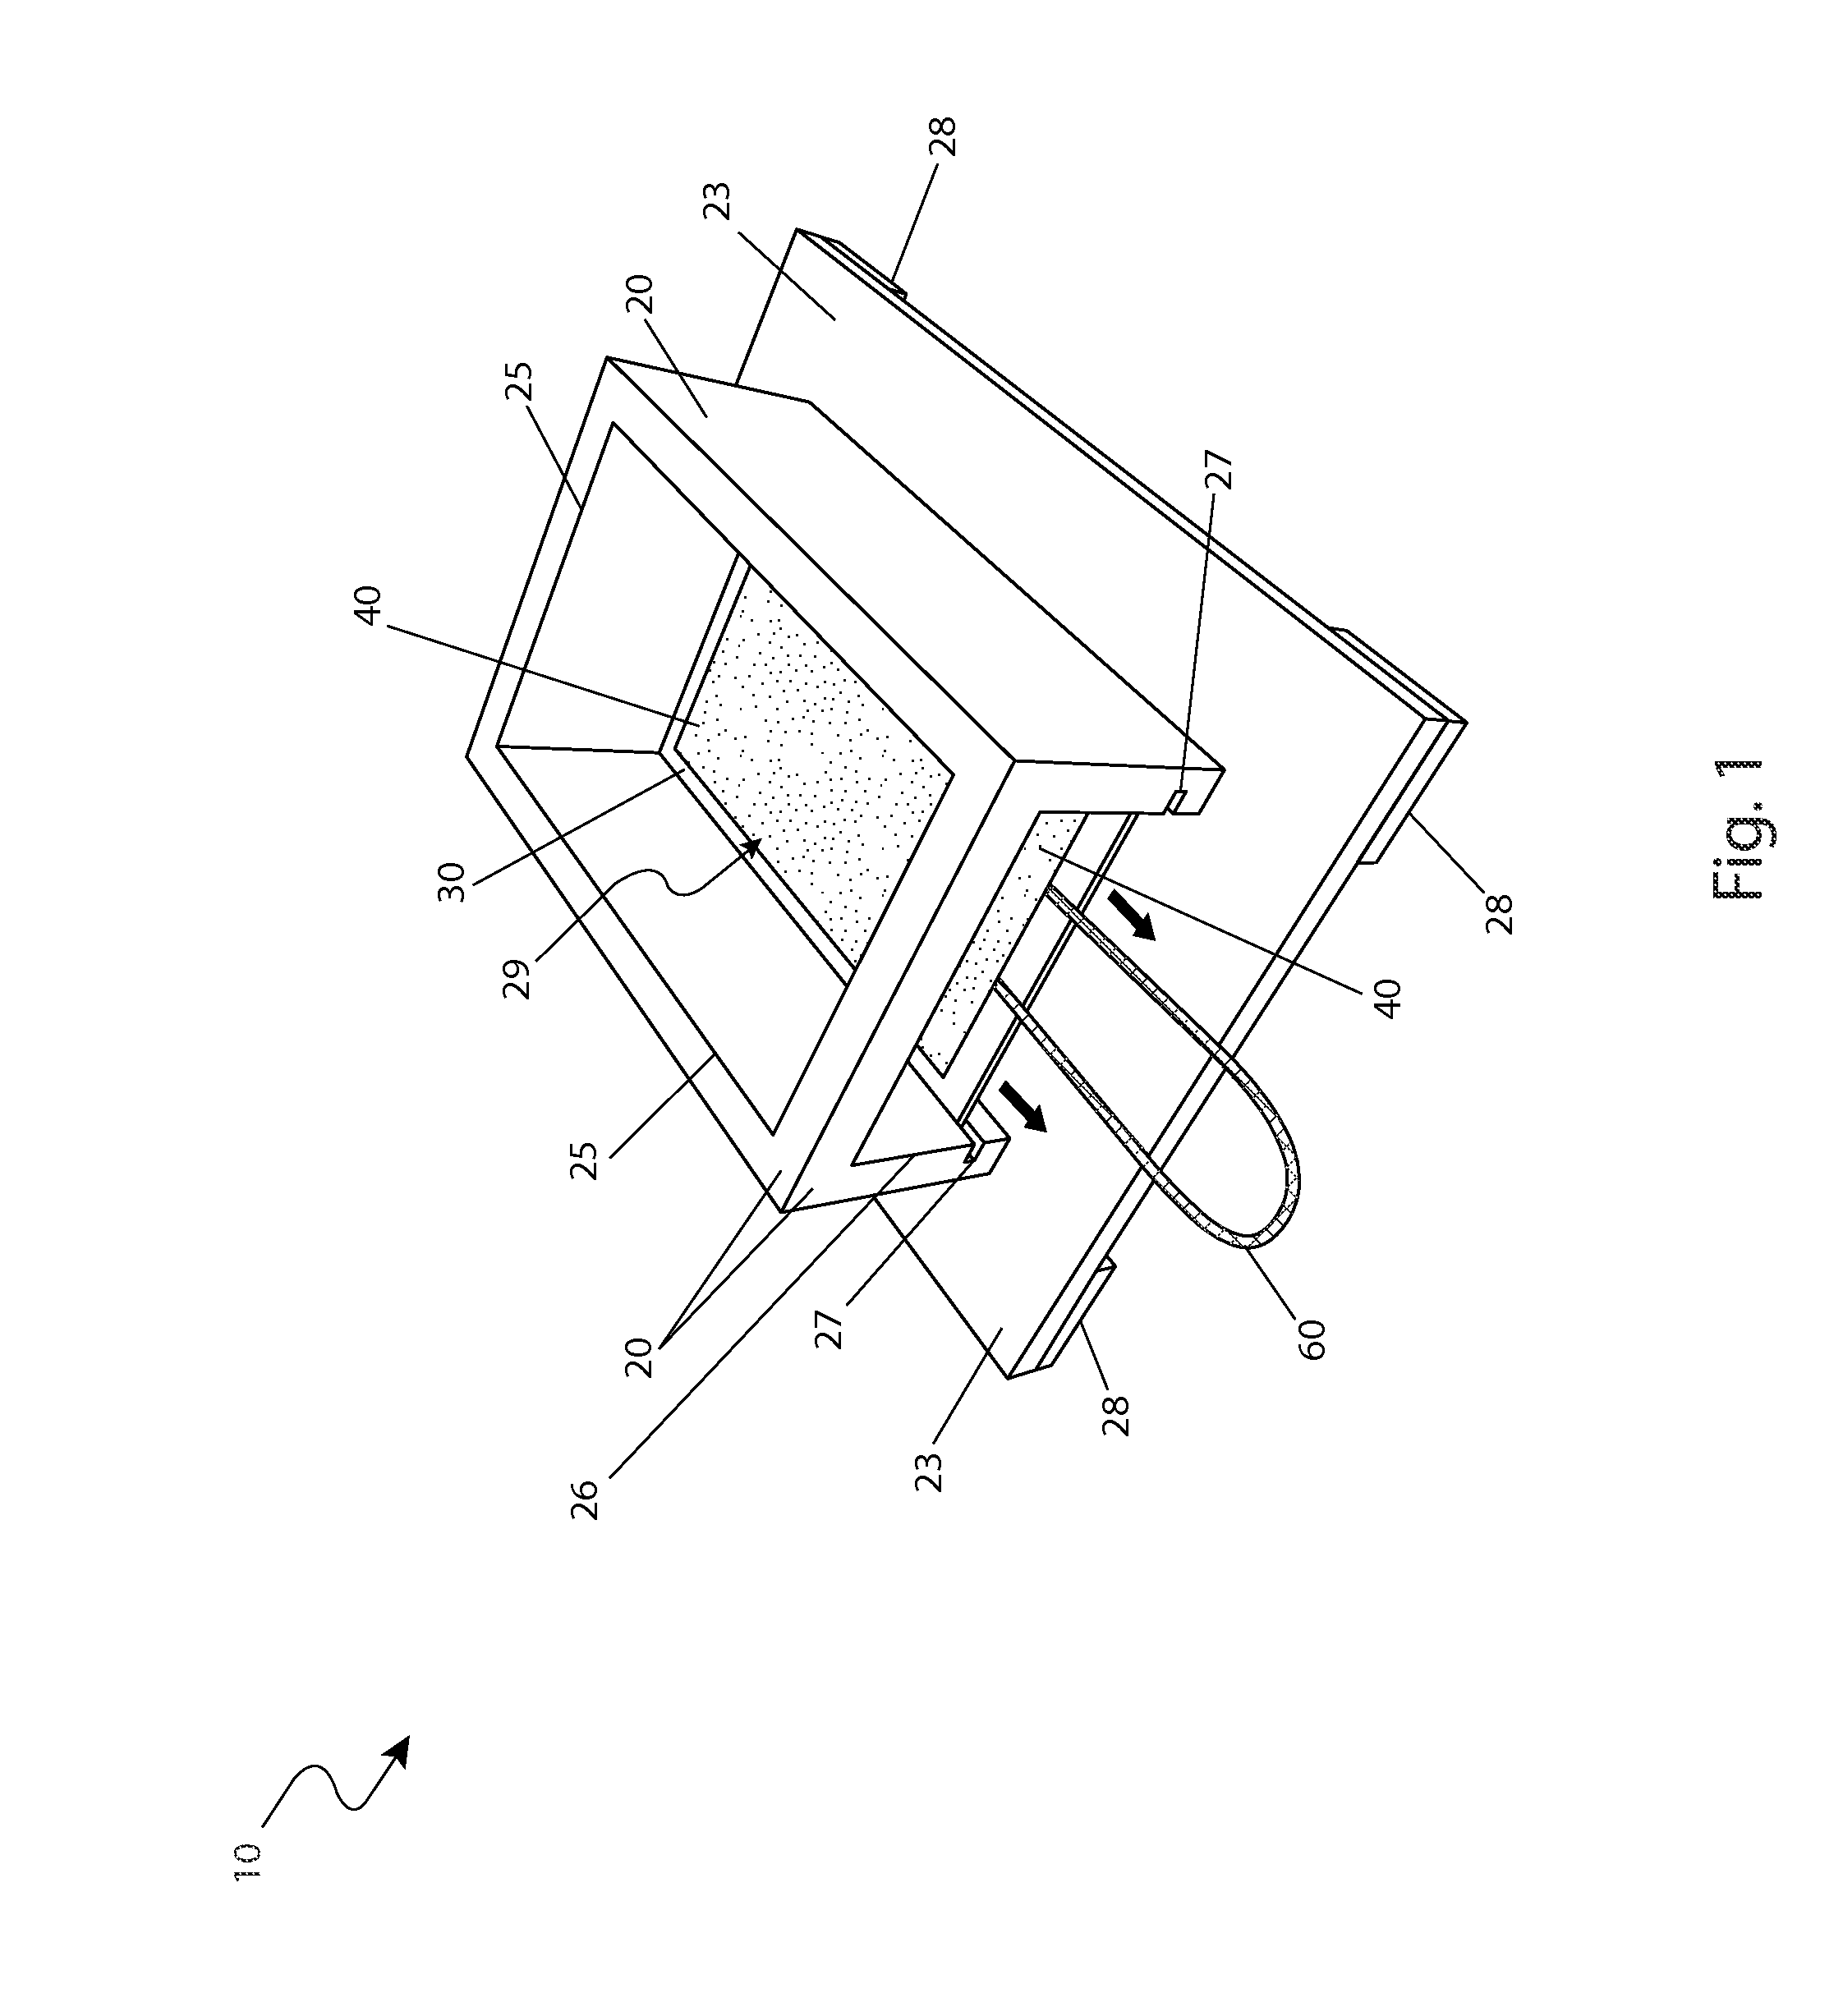 Insect capturing apparatus